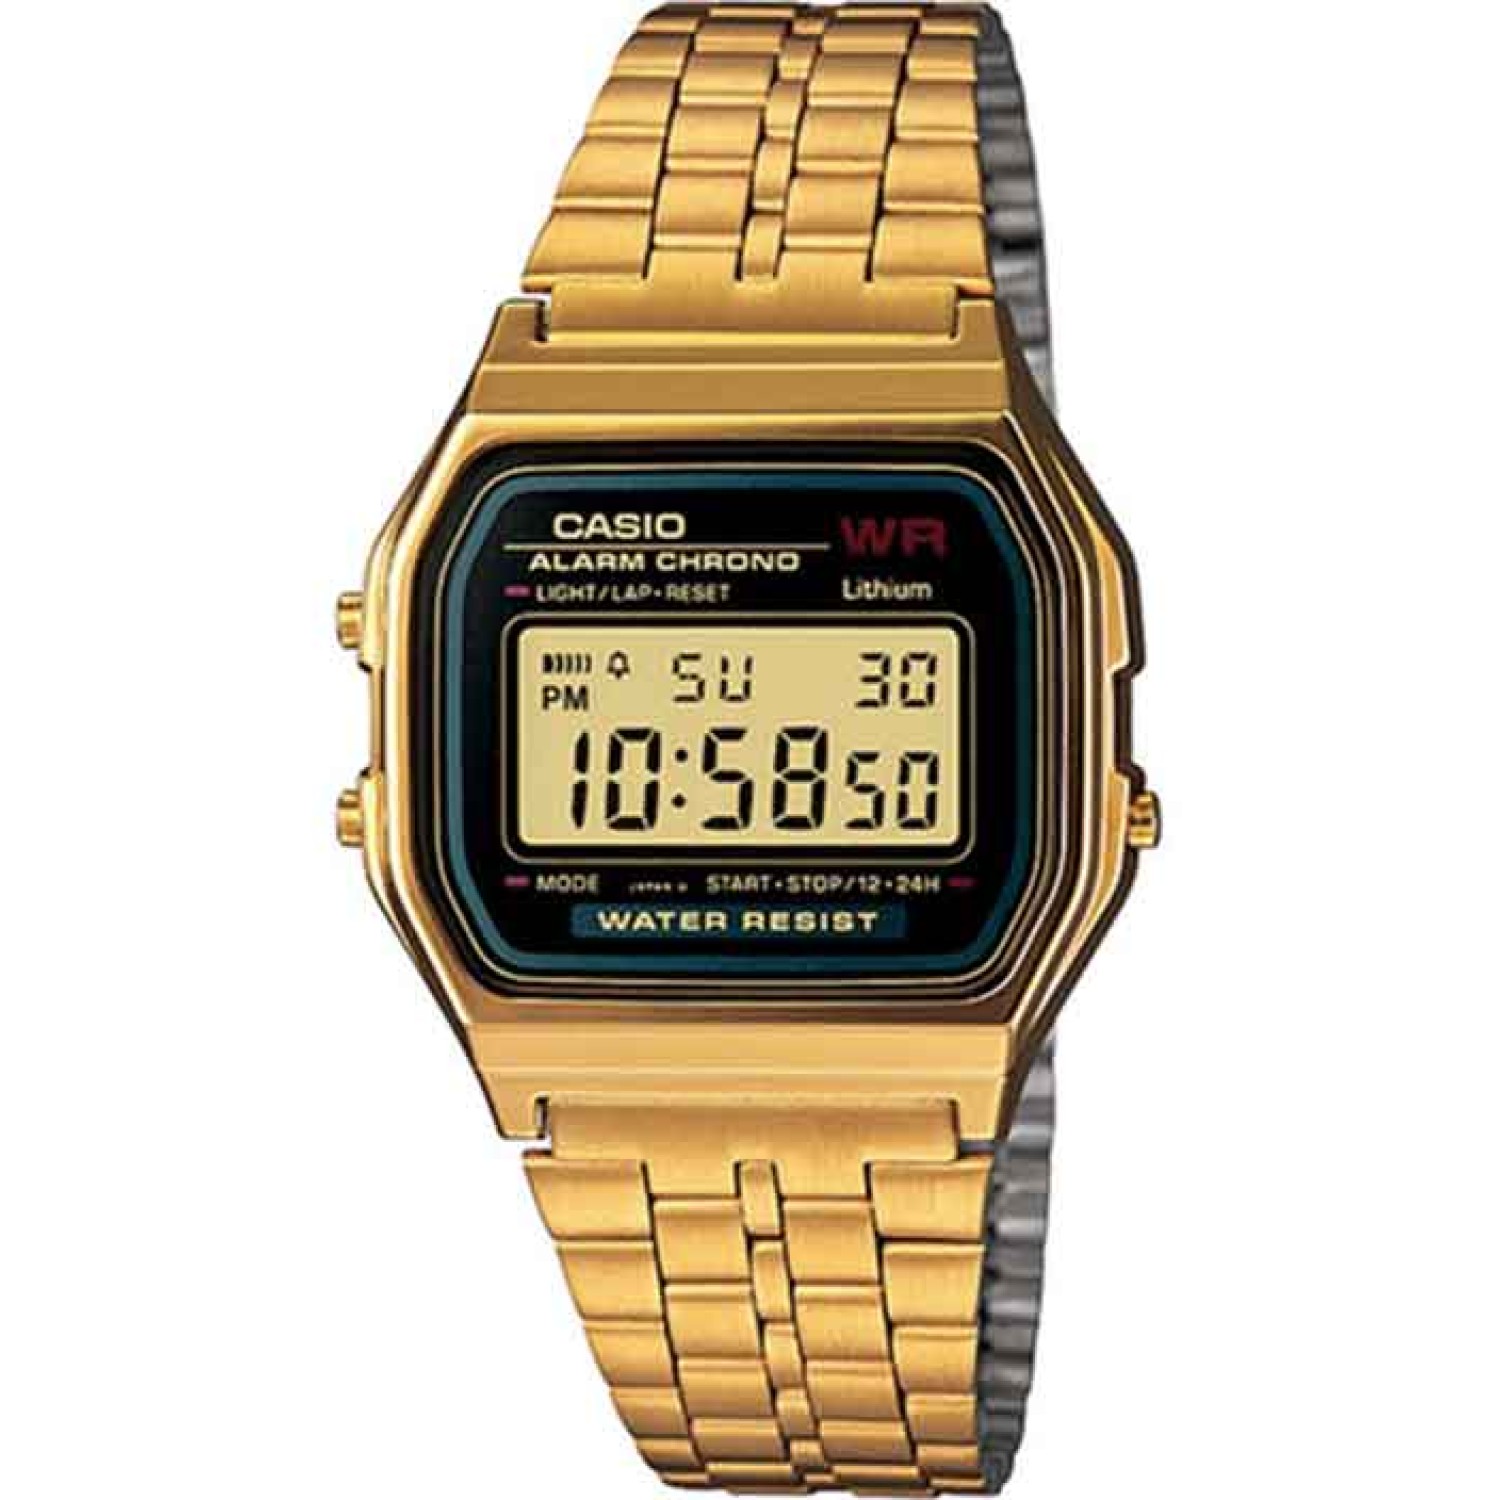 Watch  Casio Alarm Chronograph  A159WGEA-1D. Straight from the Casio Vintage Collection comes a timepiece that never goes out of style. The A159WGEA-1 combines style with features Casio is known for such as an LED light and a 1/100th second stopwatch. Thi